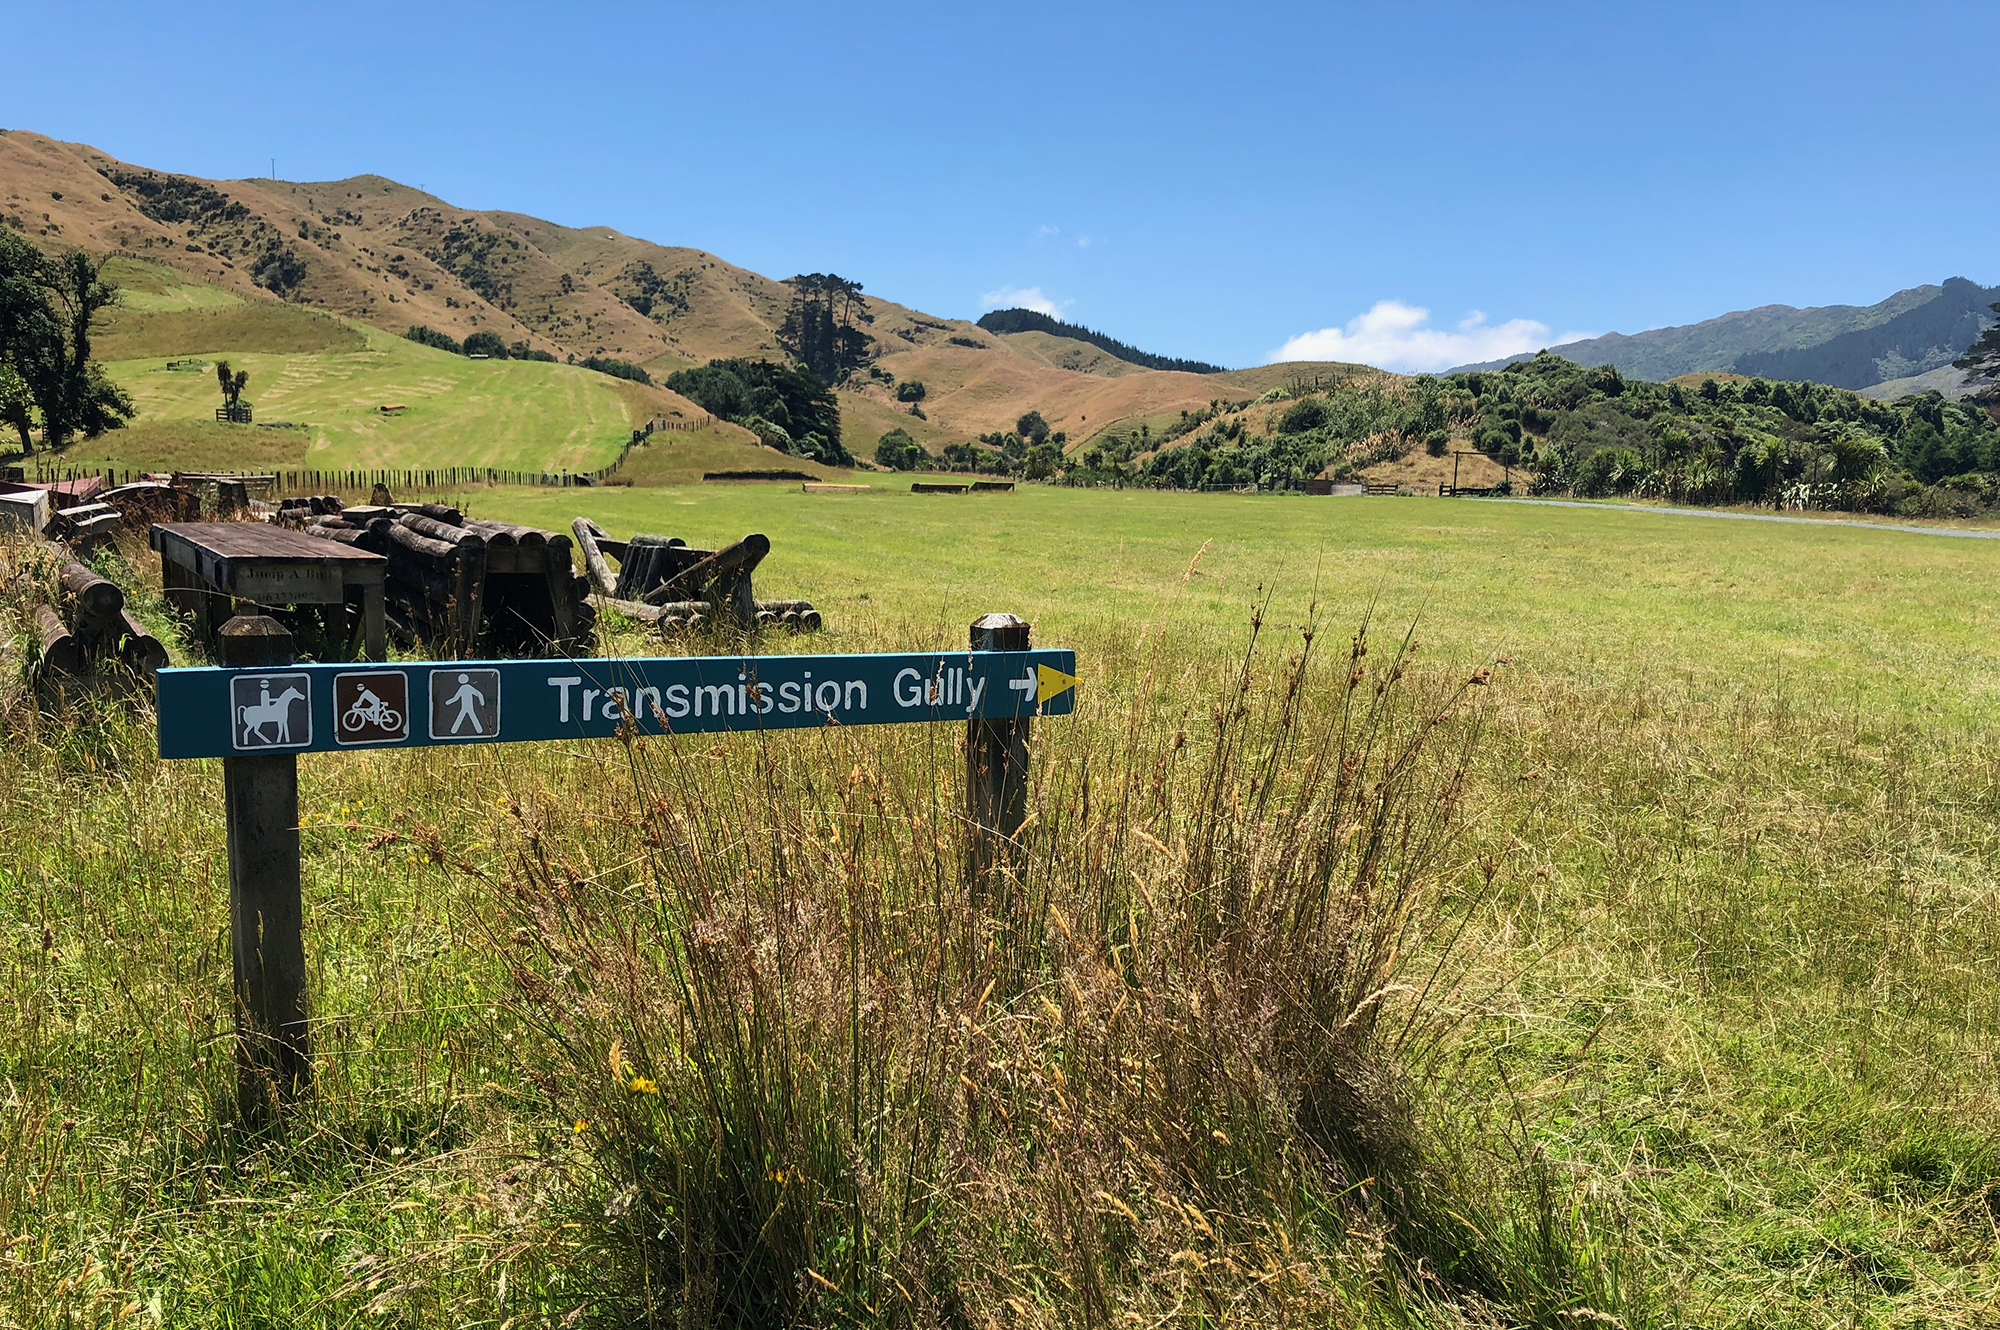 Signage to the Transmission Gully walk